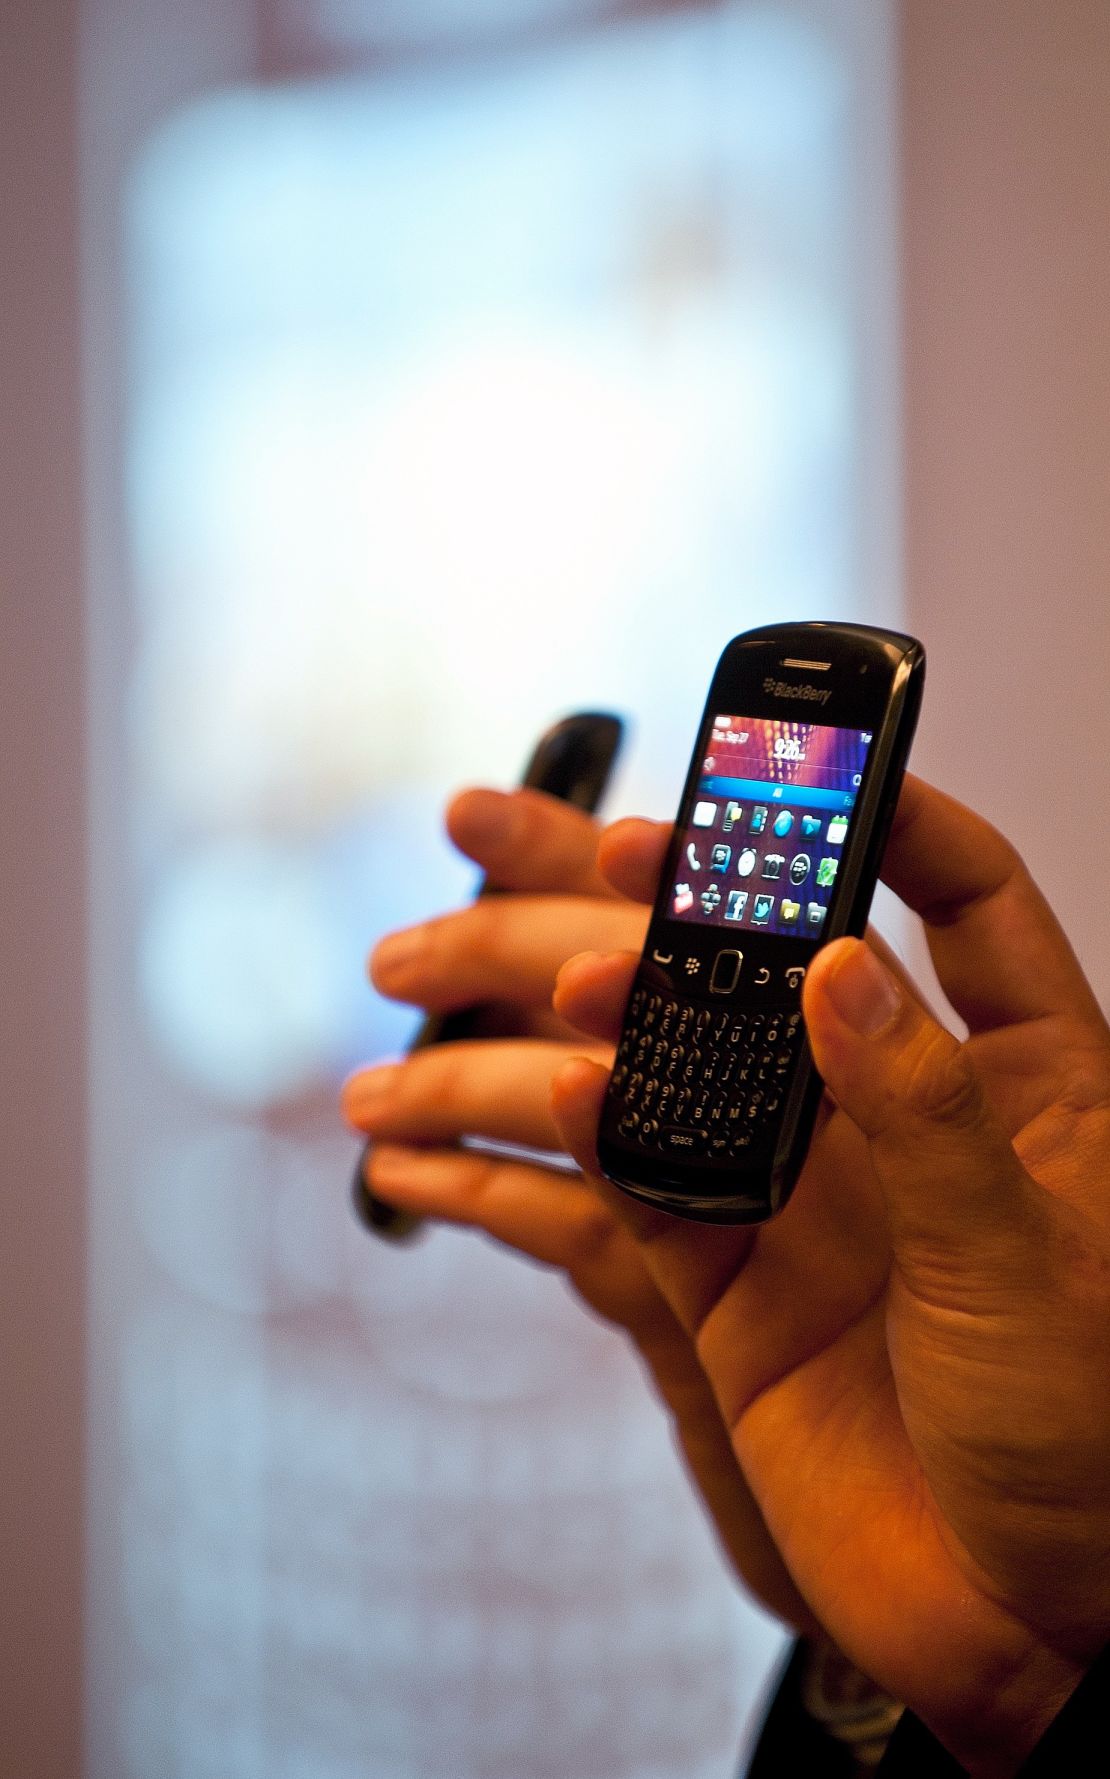 BlackBerry customers complained of mail delays and connectivity outages on their devices in October.